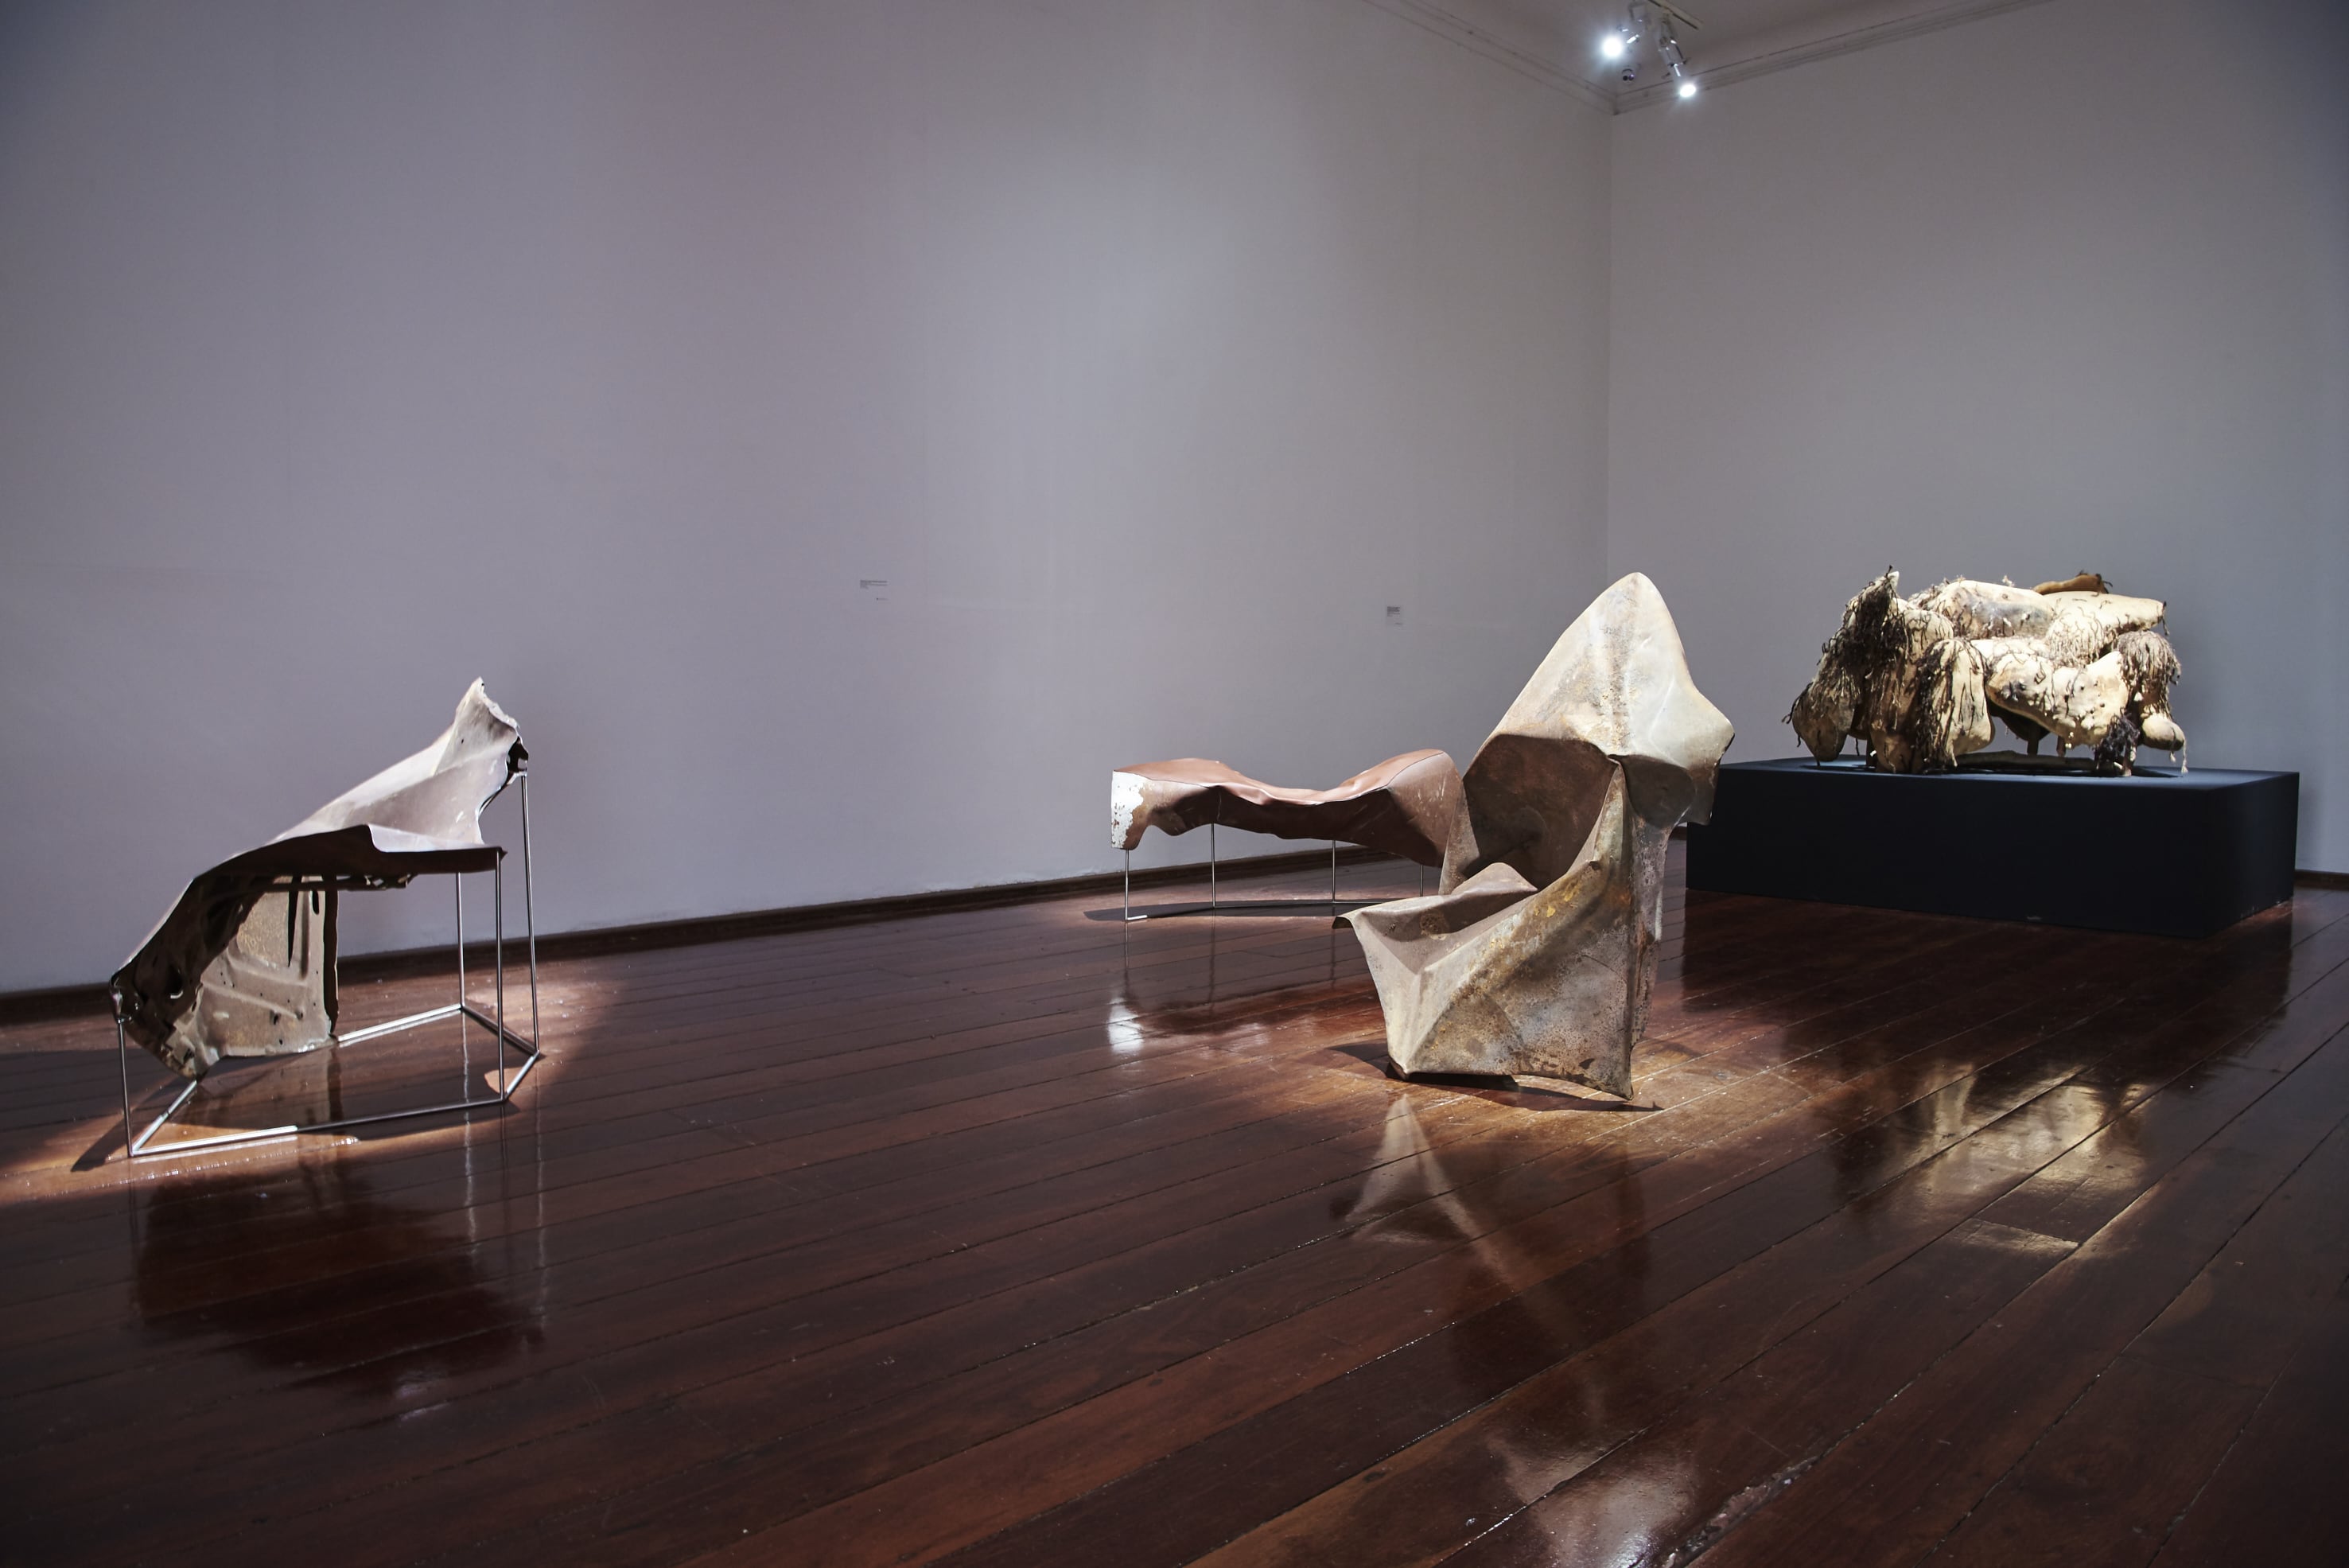 Image 03: Images from left: Trent Jansen, Johnny Nargoodah and Duane Shaw, *Collision Armchair* 2017, found car bonnet and stainless steel, 100 x 120 x 120cm. Trent Jansen, Johnny Nargoodah and Duane Shaw, *Collision Bench, 2017* found car bonnet, stainless steel and New Zealand cow leather. 55 x 120 x 60cm. Trent Jansen, Johnny Nargoodah and Duane Shaw, *Collision Vessel* 2017, found car bonnet, 60 x 130 x 60cm. Elsie Dickens, Trent Jansen, Yangkarni Penny K-Lyons, Myarn Lawford, Rita Minga, Eva Nargoodah, Illium Nargoodah, Johnny Nargoodah, Duane Shaw and Gene Tighe, *Jangarra Armchair* 2017, Jartalu wood, gum branches, human hair and fasteners. 100 x 140 x 105cm. Image courtesy of the artists. Photo: Rebecca Mansell.